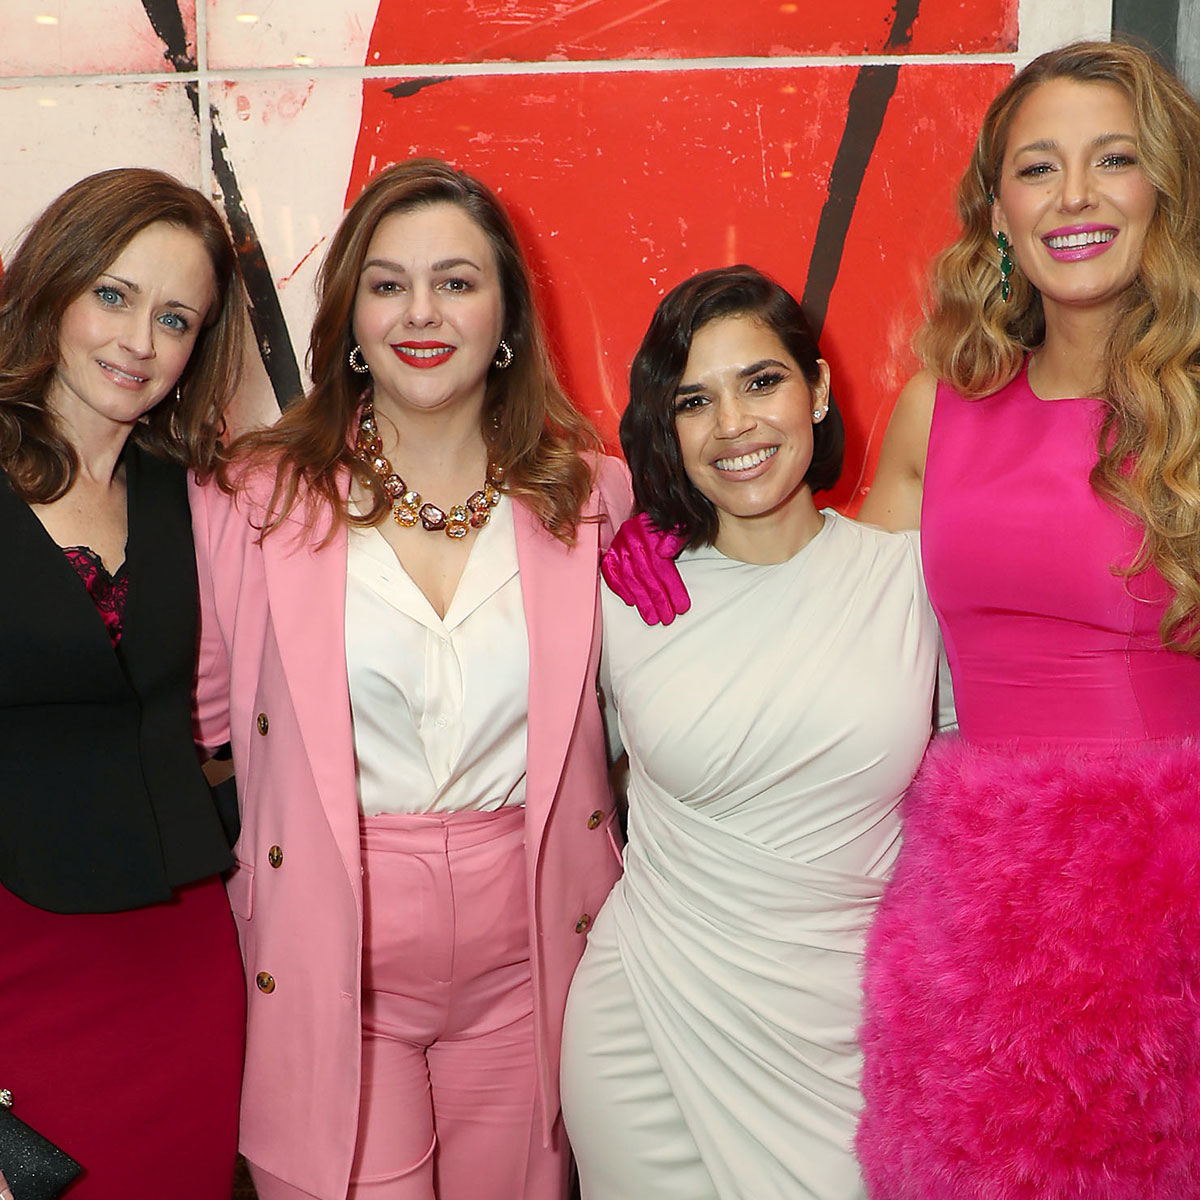 Travel on Over to See America Ferrera's Sisterhood With Blake Lively, Amber Tamblyn and Alexis Bledel